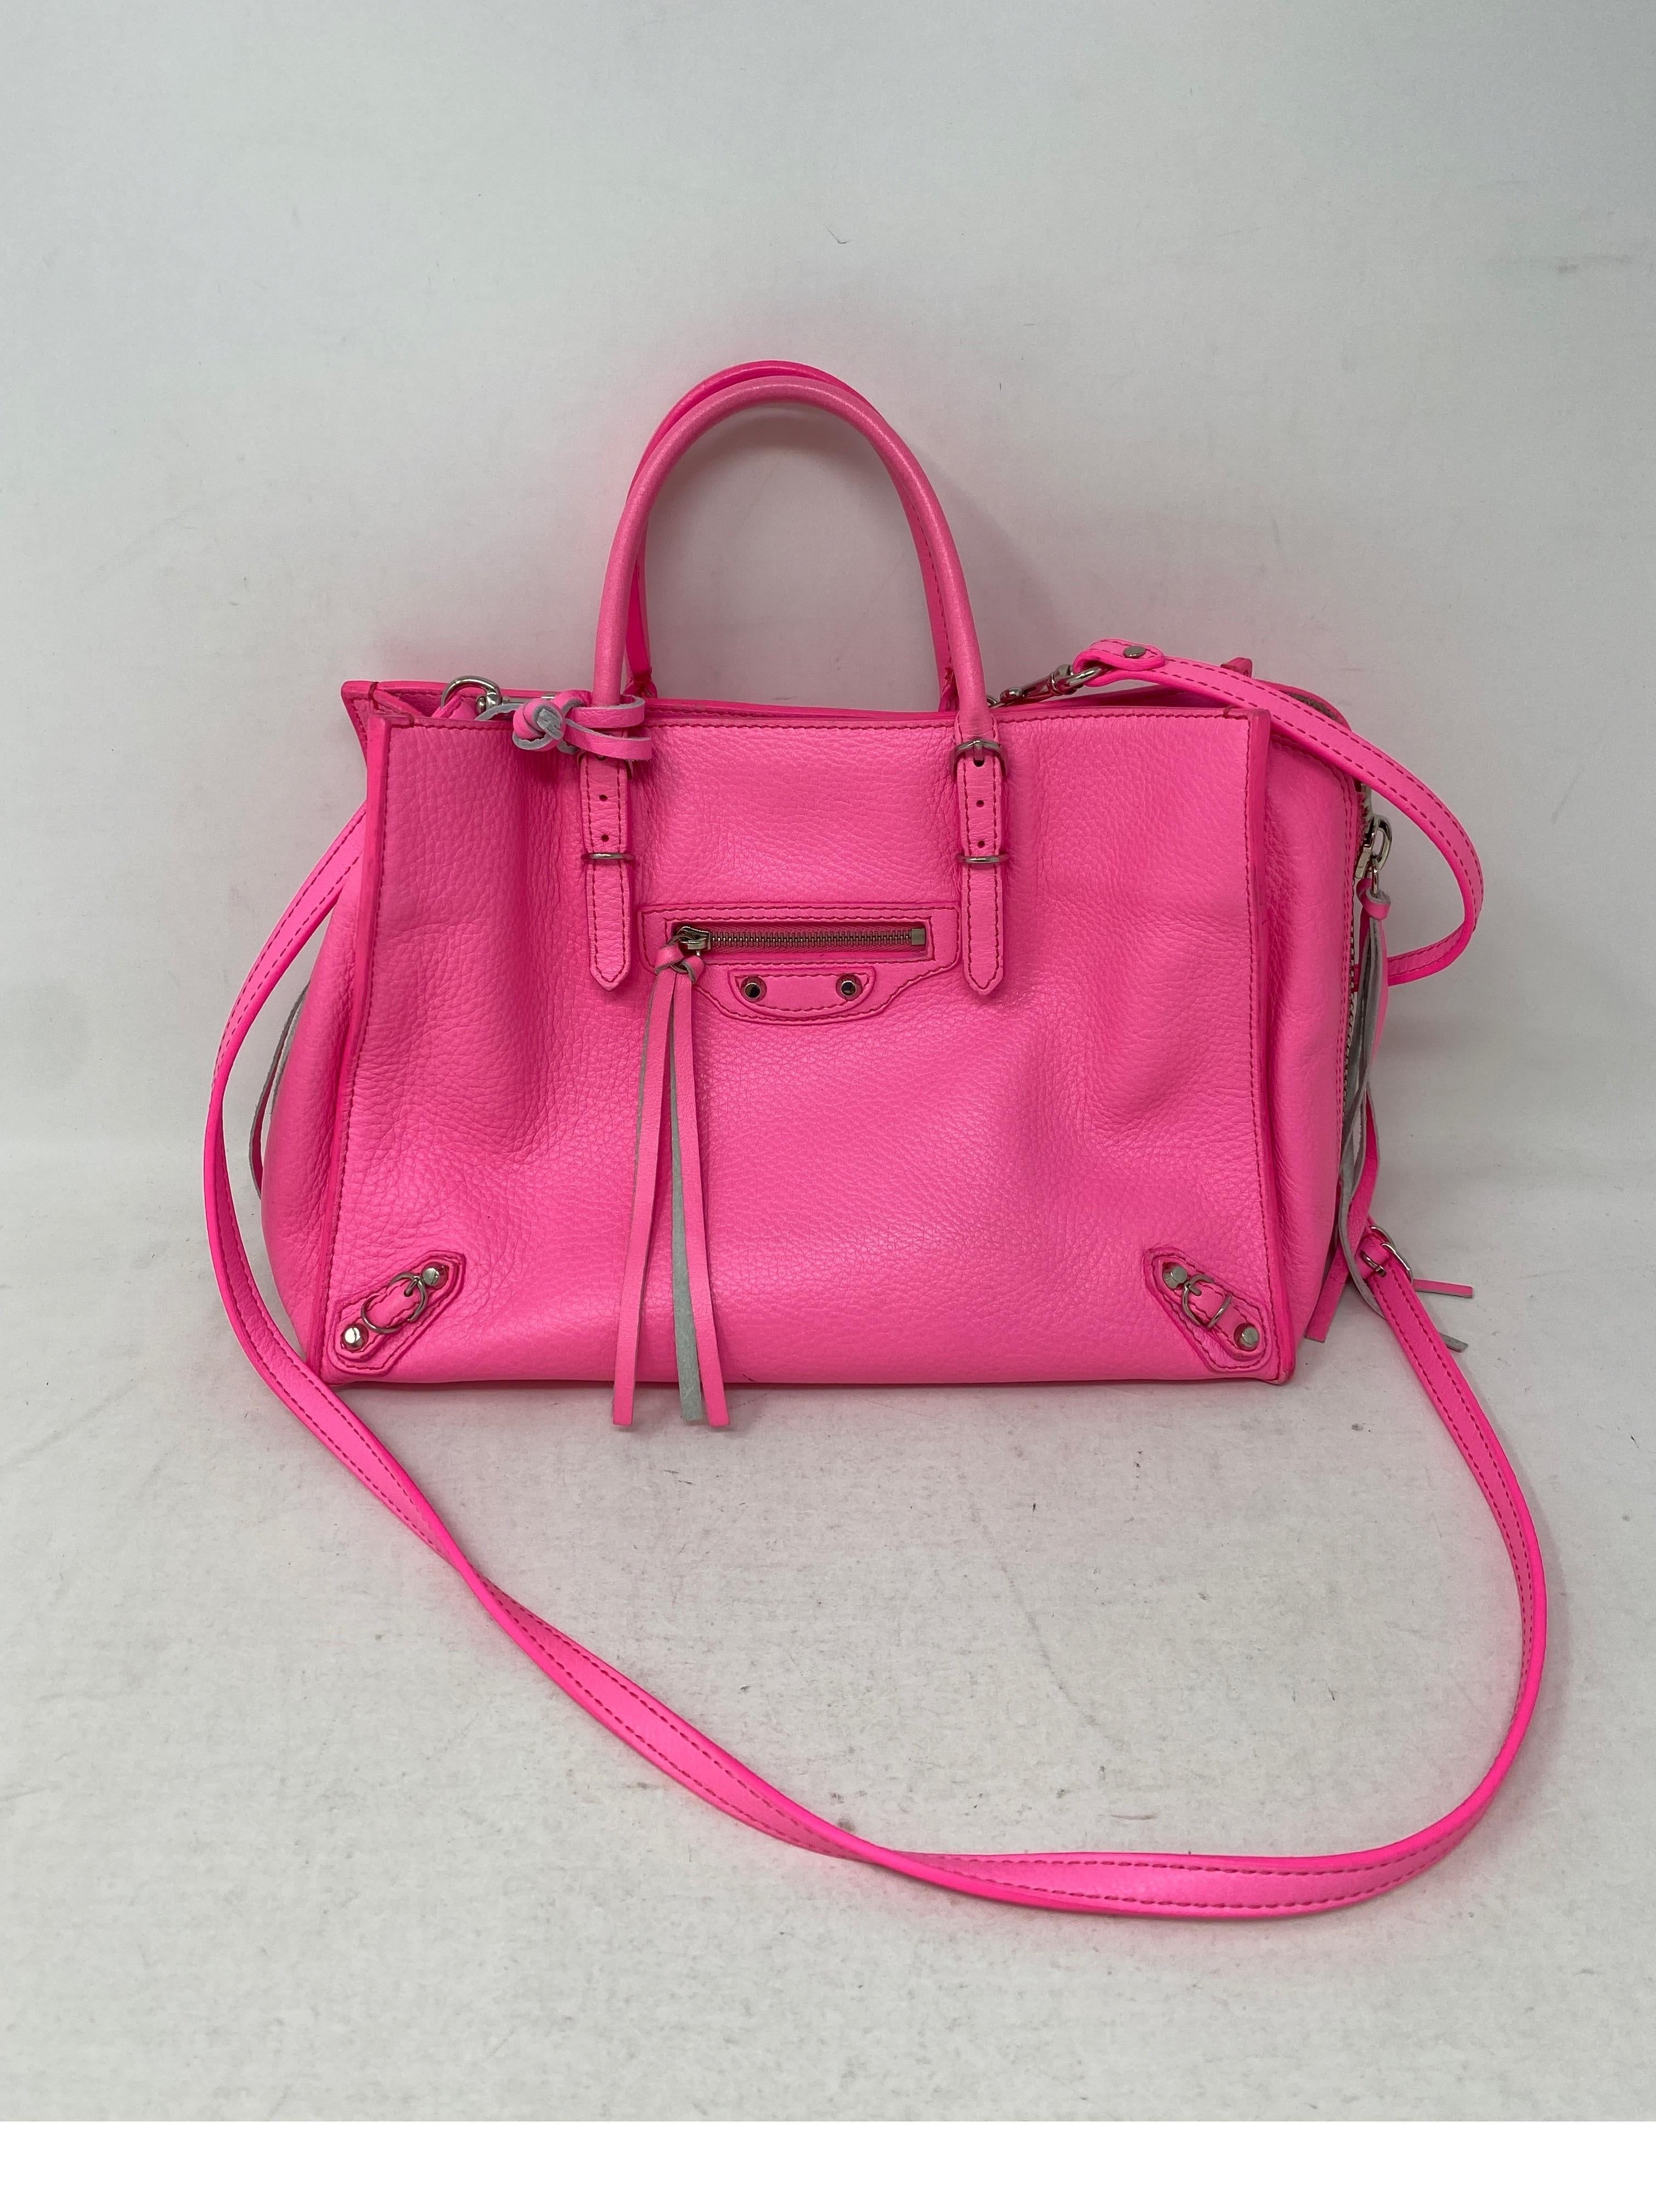 Balenciaga Hot Pink Mini Bag. Light marks throughout. Hot pink neon color. Fair to good condition overall. Guaranteed authentic. 